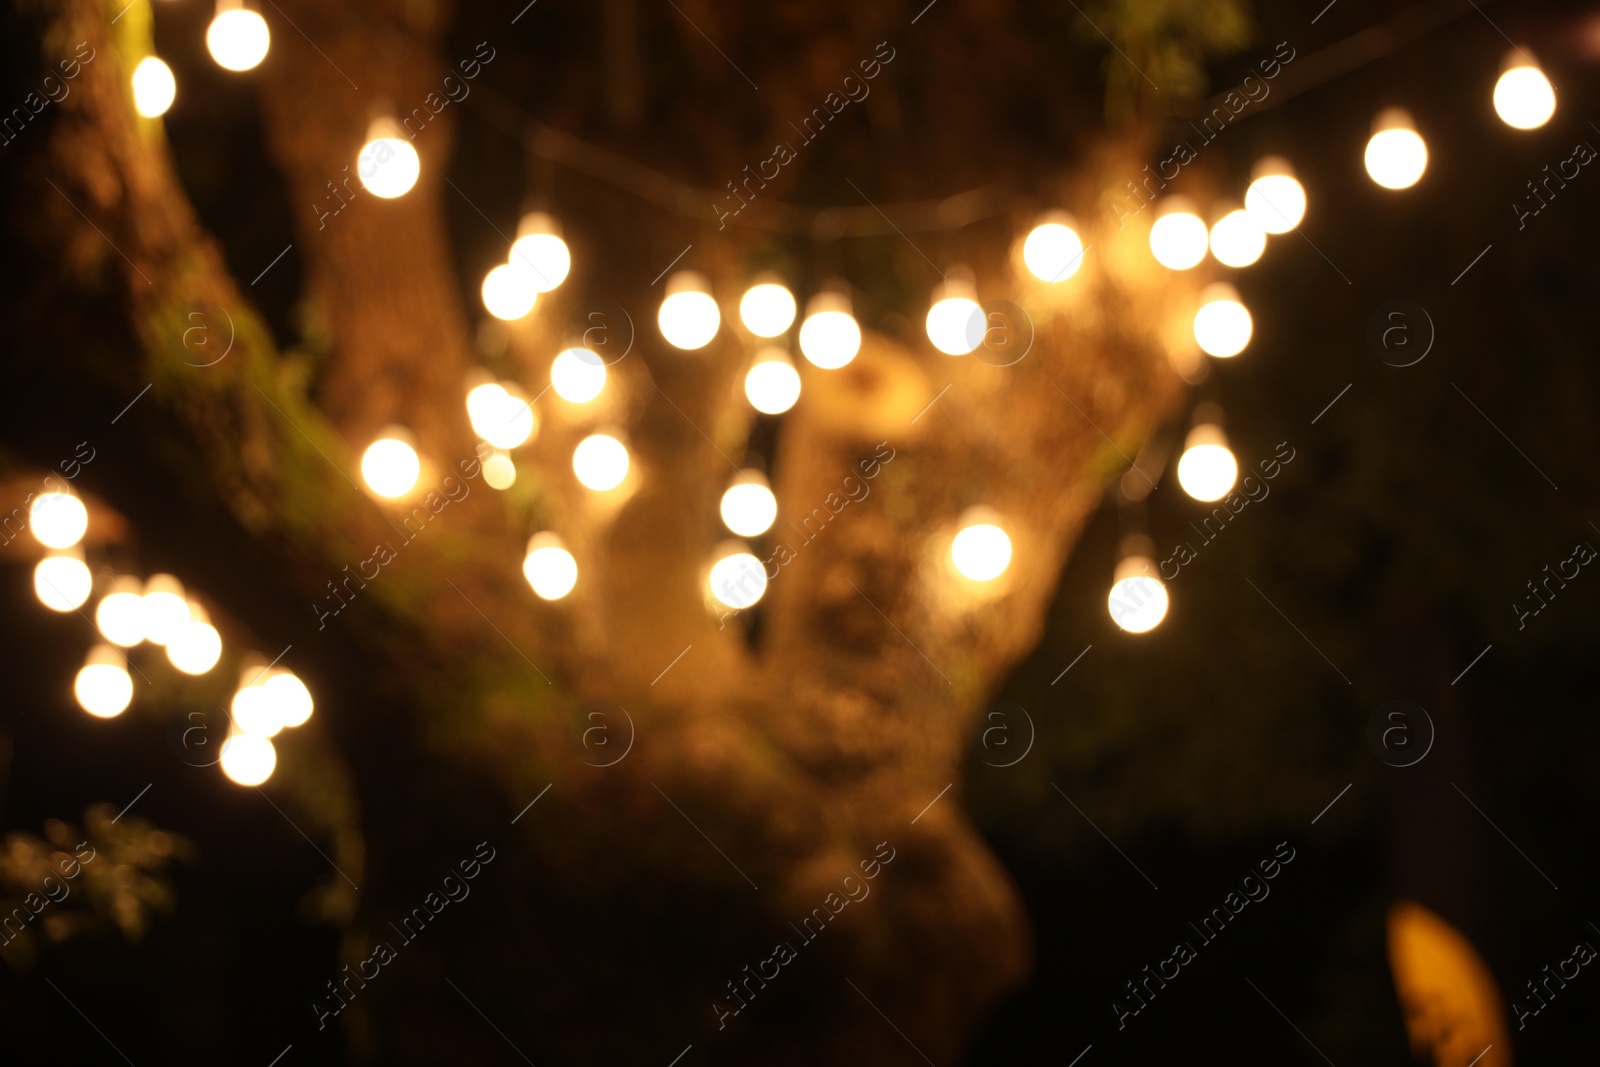 Photo of Blurred view of tree with lights at night